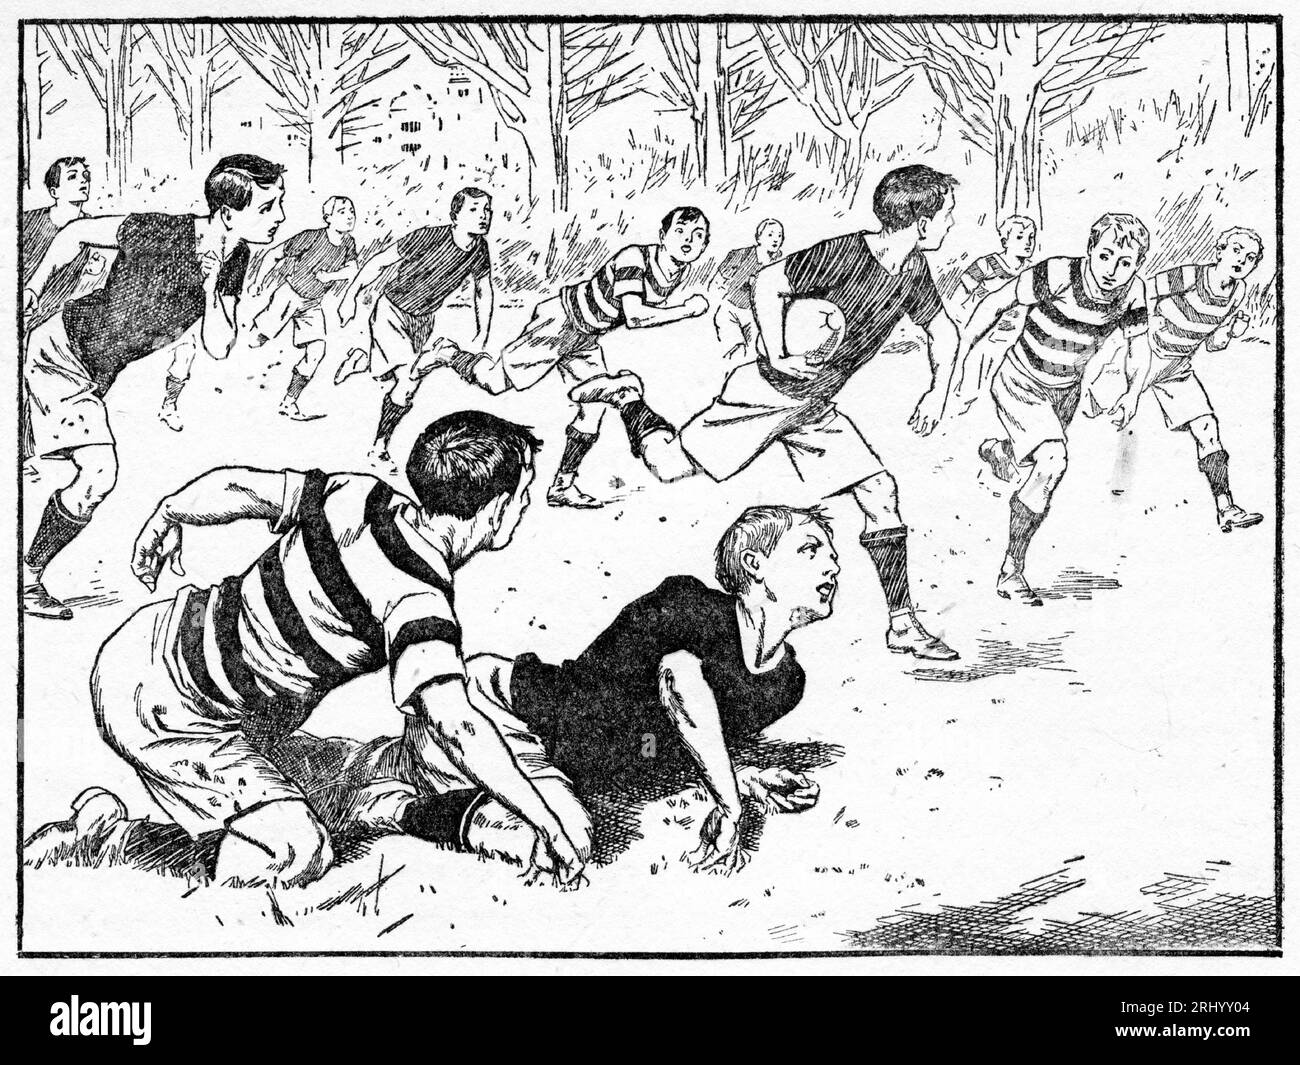 Illustration from a Boys Own magazine about boys playing rugby at the old school, circa 1910 Stock Photo